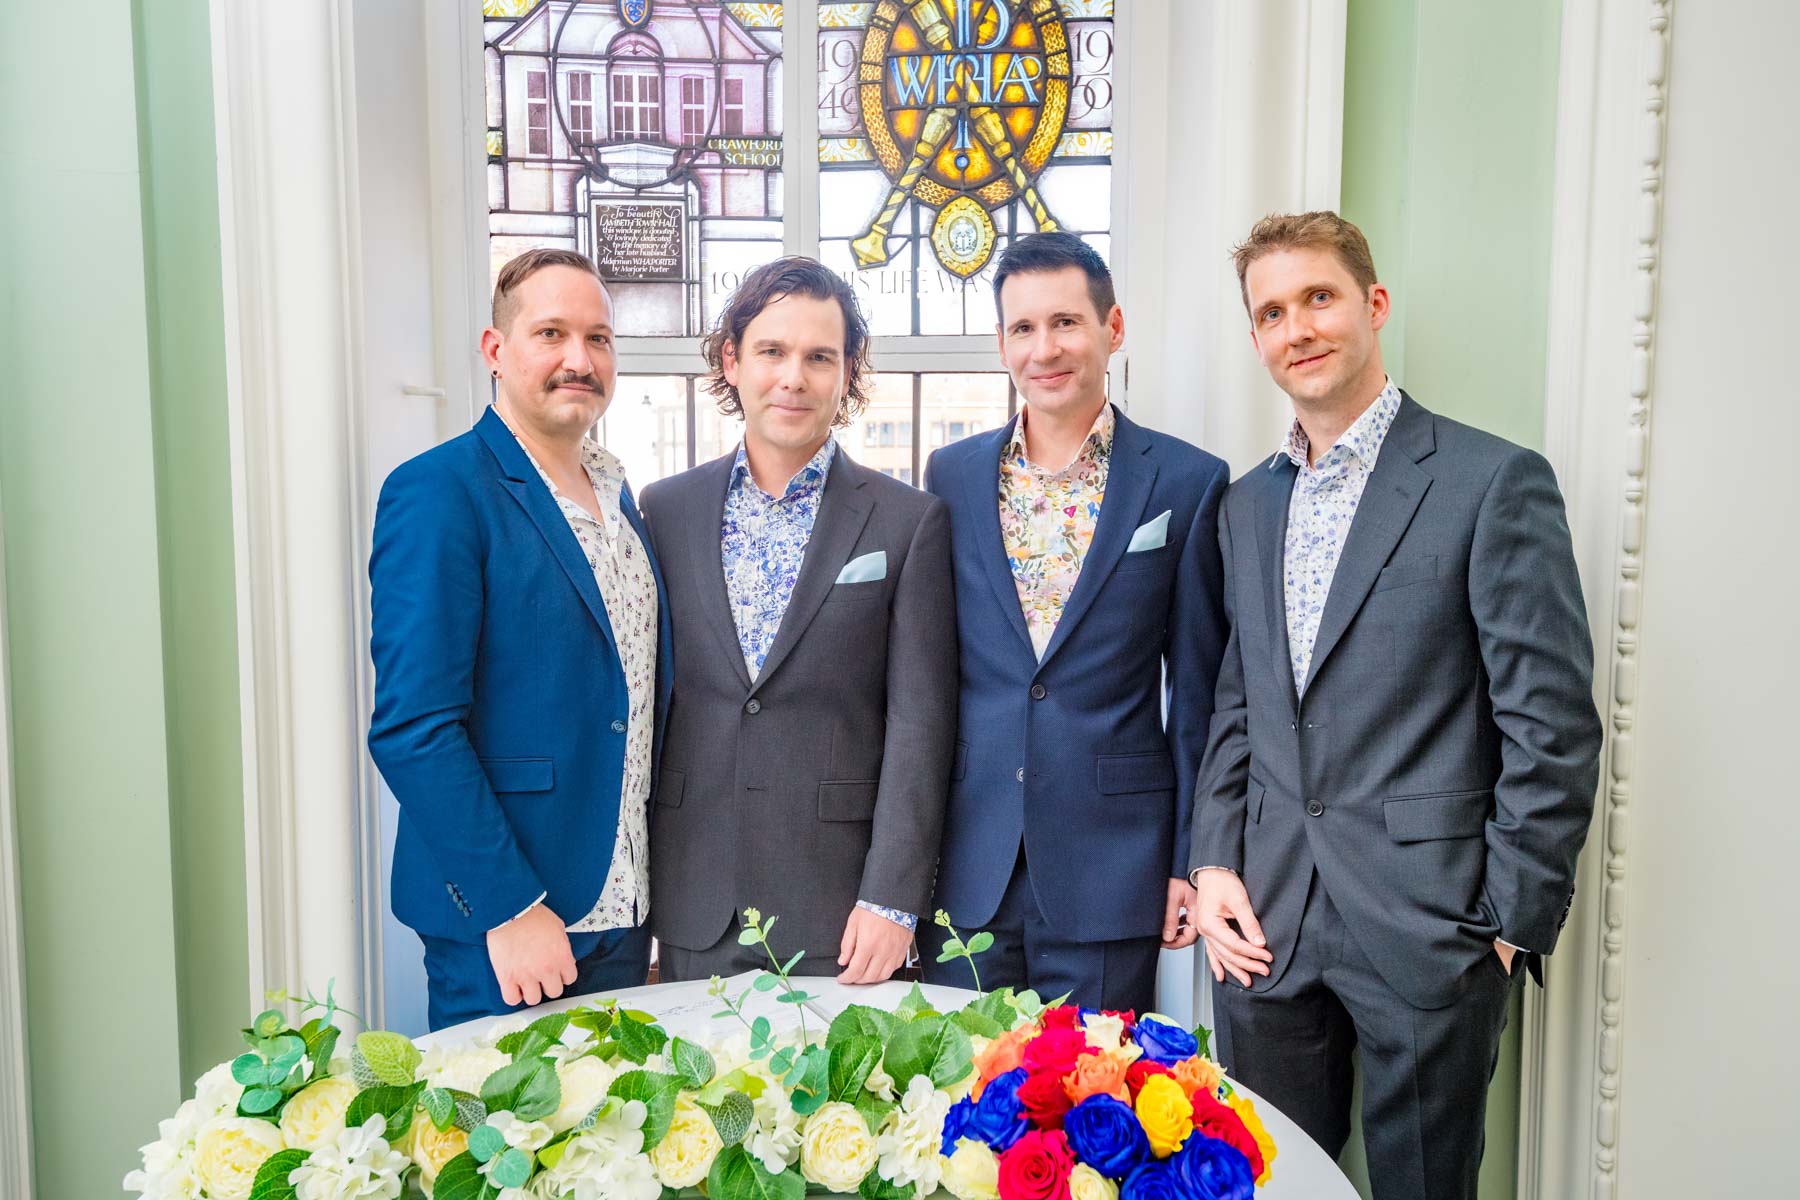 The grooms and witnesses pose behind a floral arrangement after their wedding in Brixton